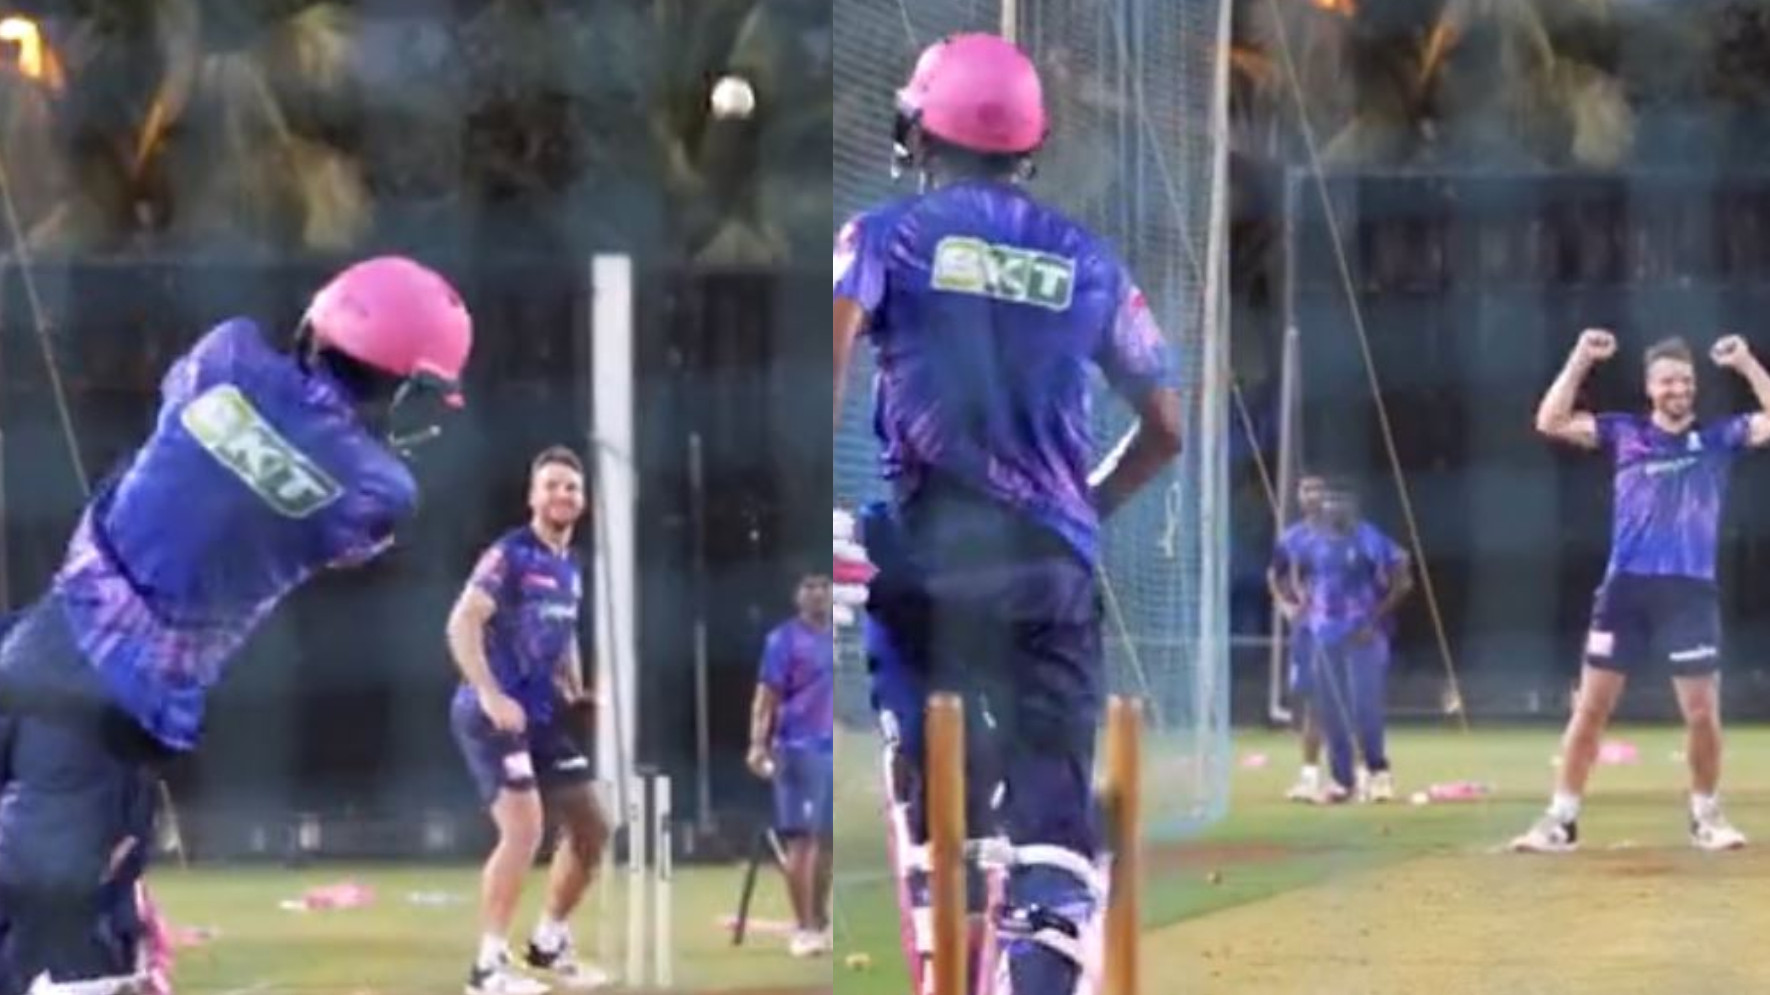 IPL 2022: WATCH- Yuzvendra Chahal, the batter faces off against Jos Buttler, the bowler and hilarity ensues